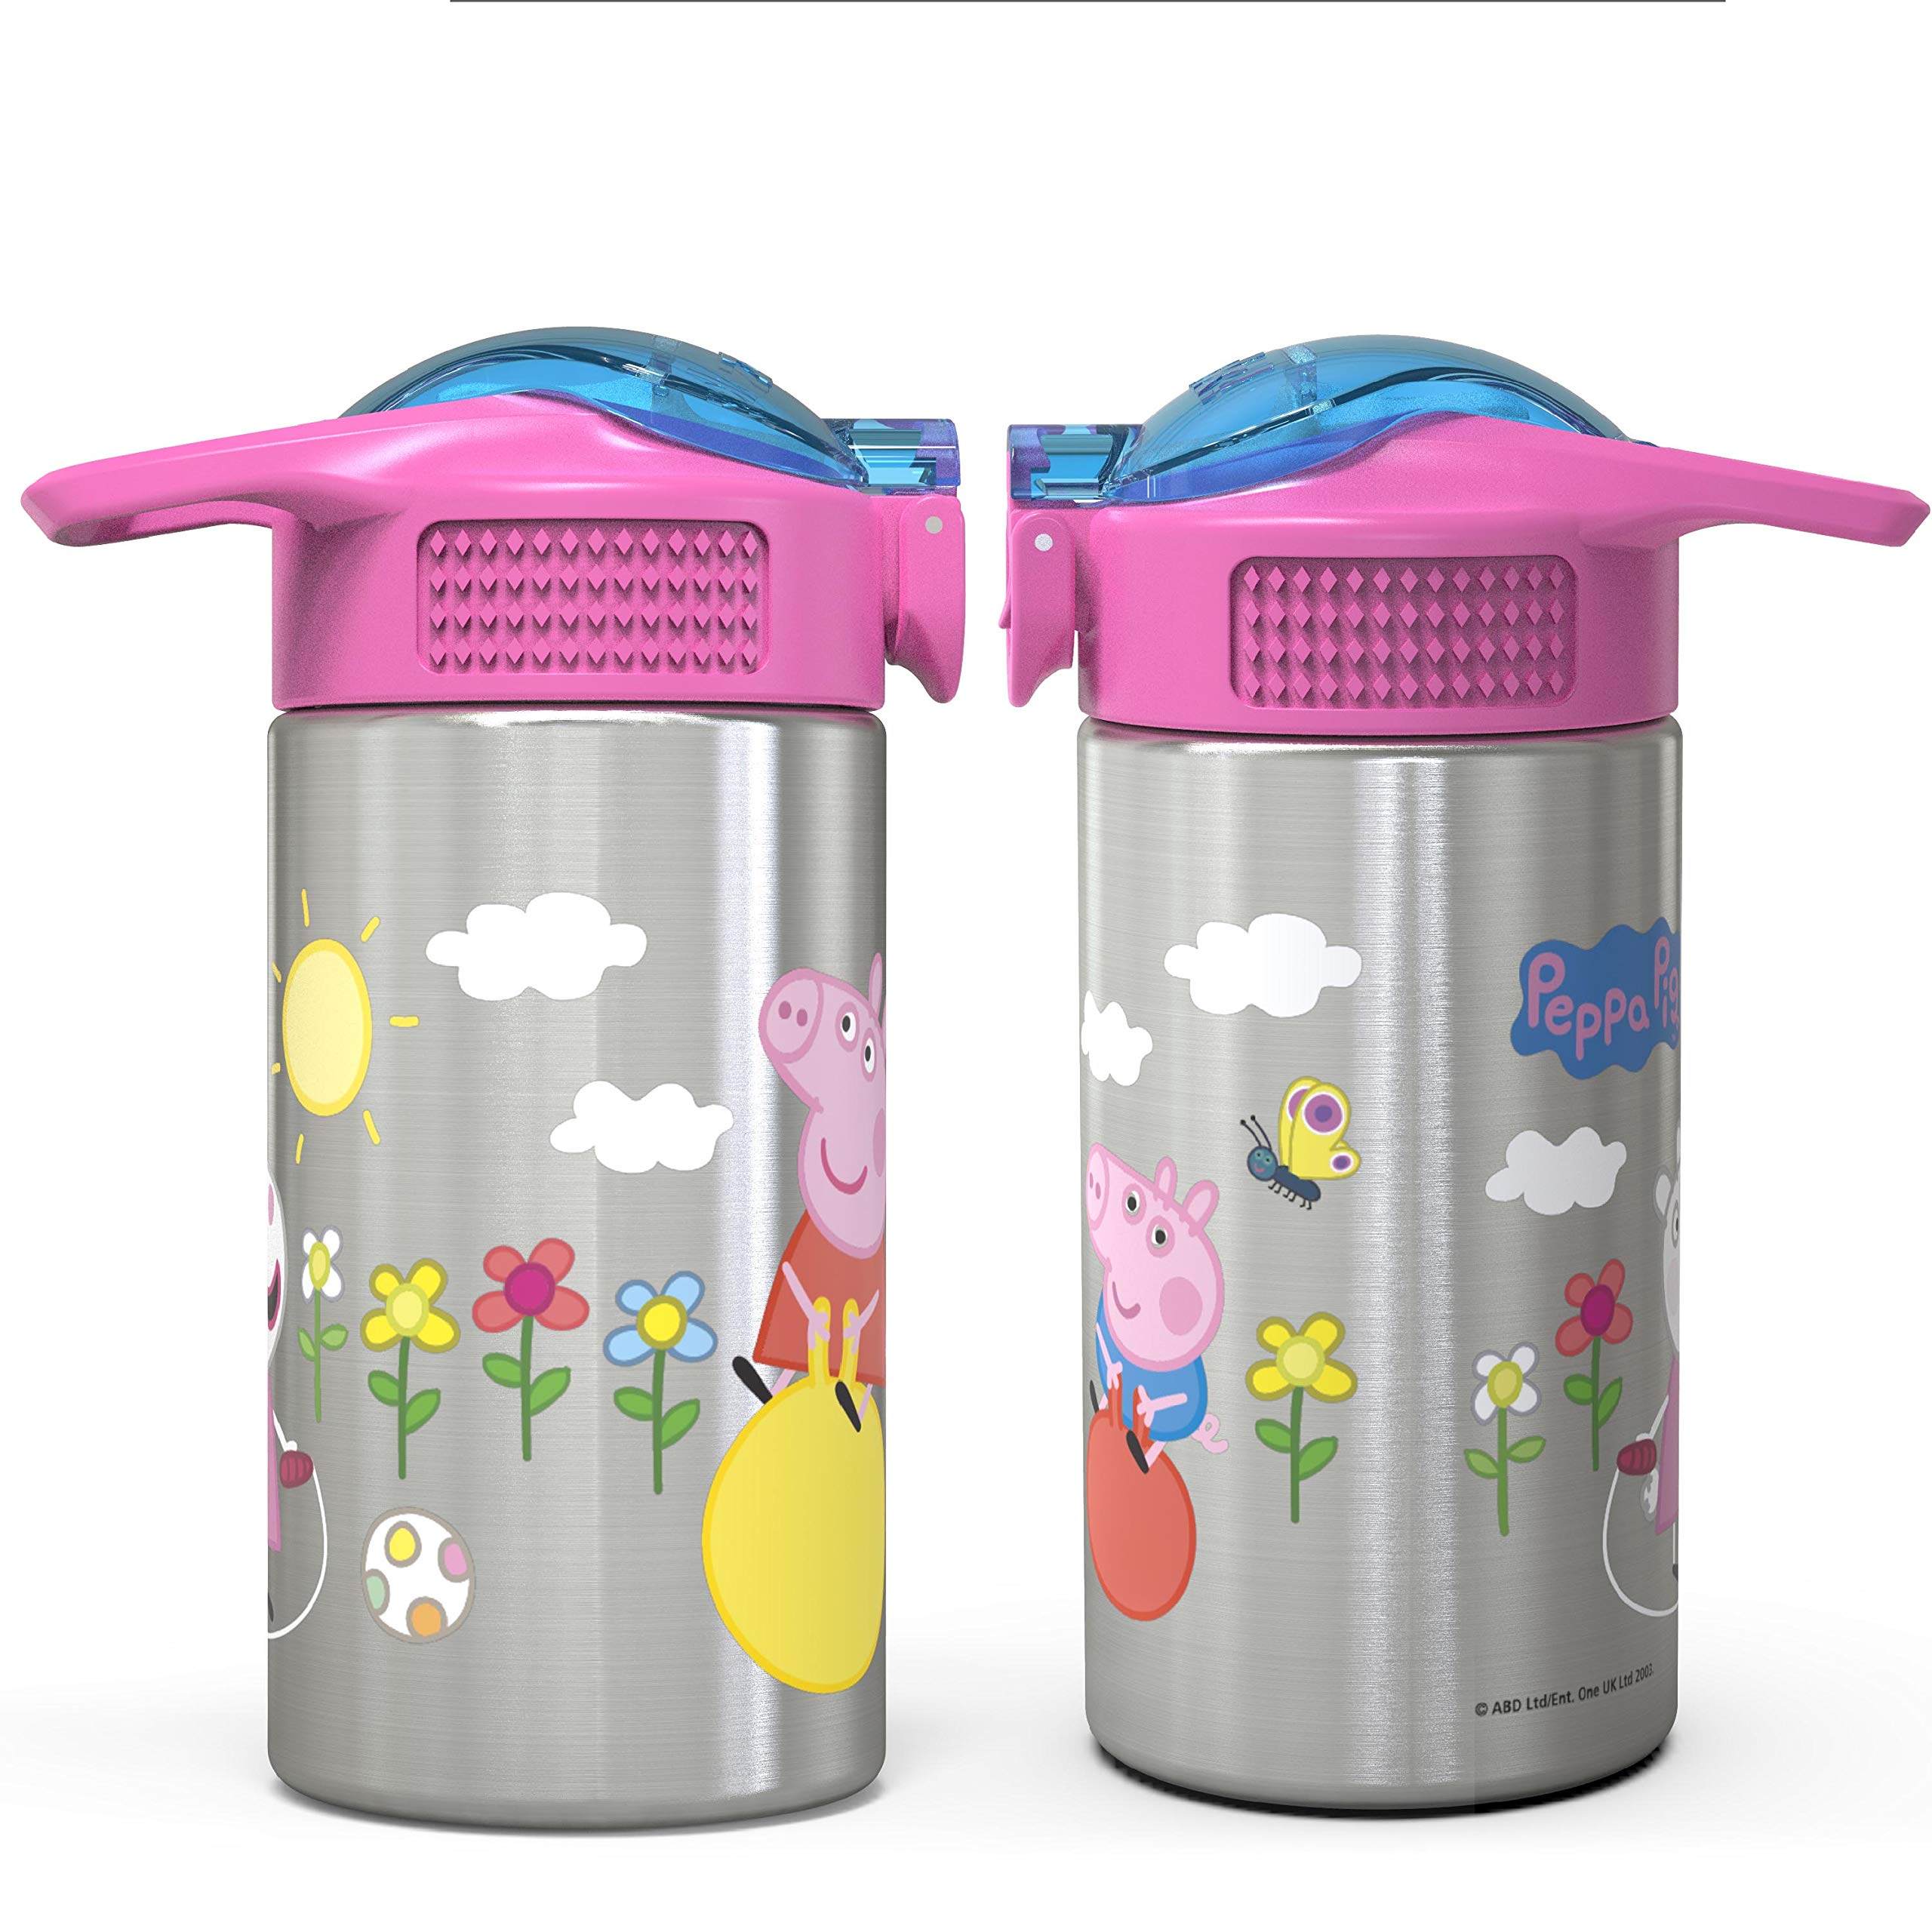 Zak! Designs Zak Designs Peppa Pig 155oz Stainless Steel Kids Water Bottle with Flip-up Straw Spout - BPA Free Durable Design, Peppa Pig SS, 